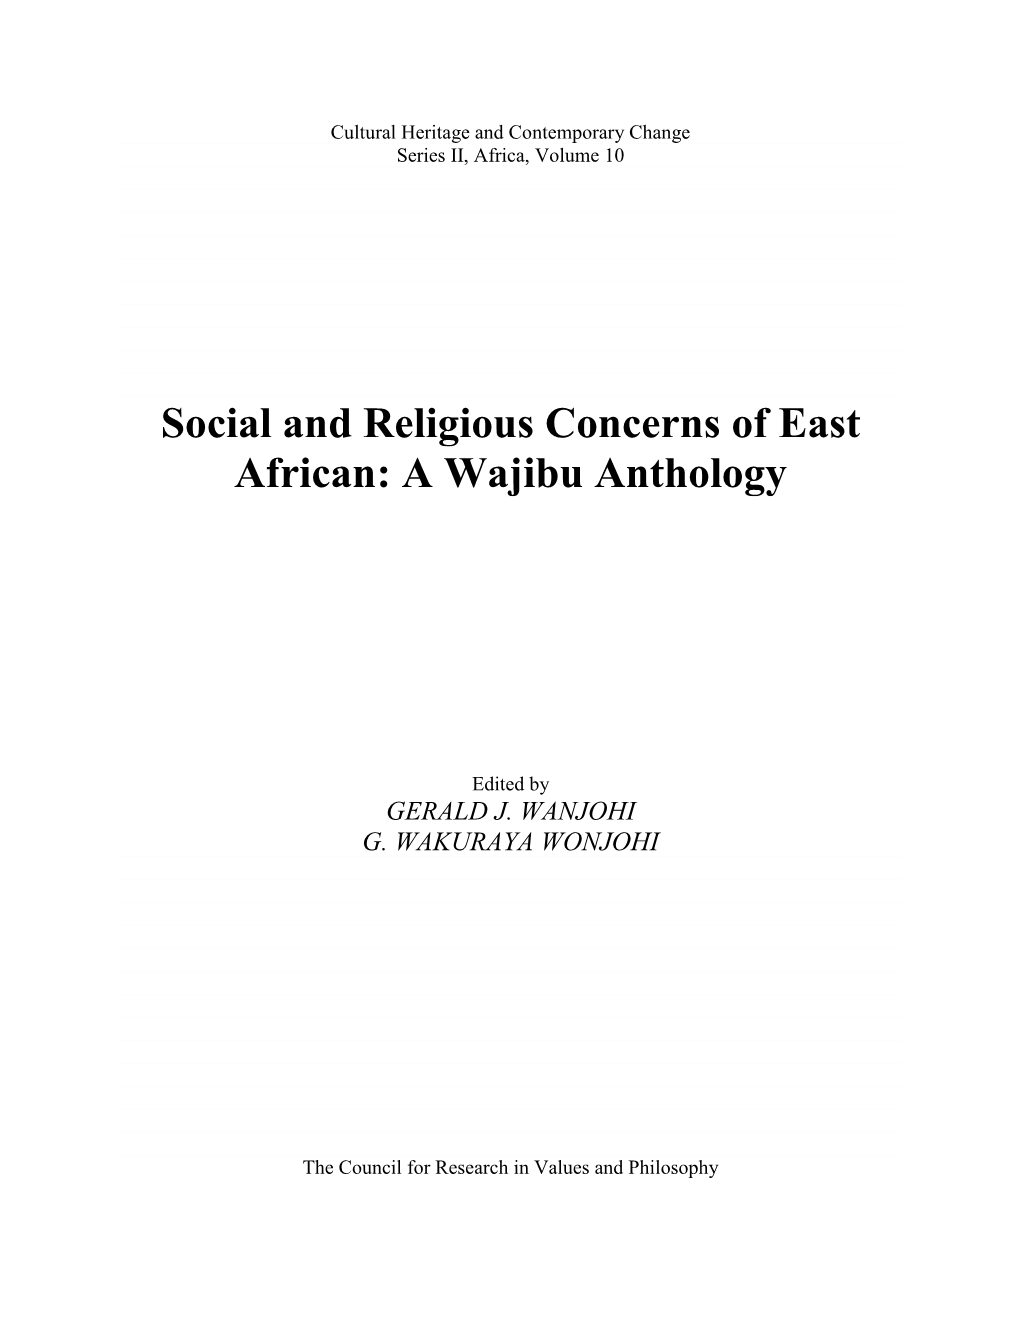 Social and Religious Concerns of East African: a Wajibu Anthology